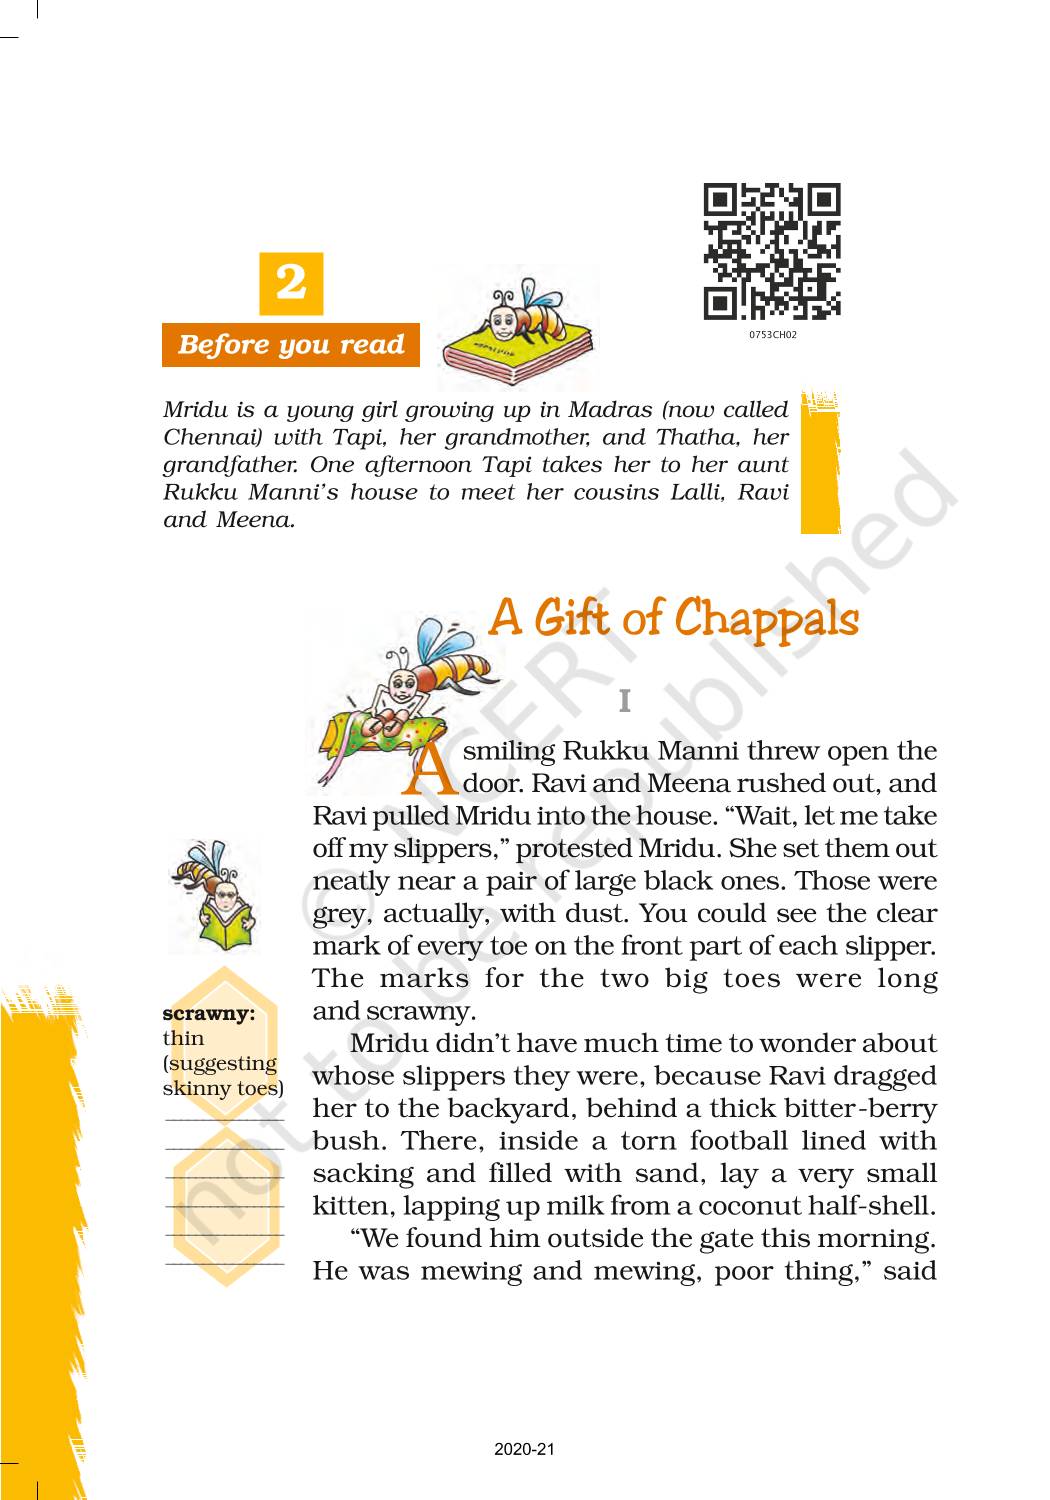 Please make a flowchart for chapter gift of chappals in english - English -  Homophone Homograph Homonym - 12676929 | Meritnation.com